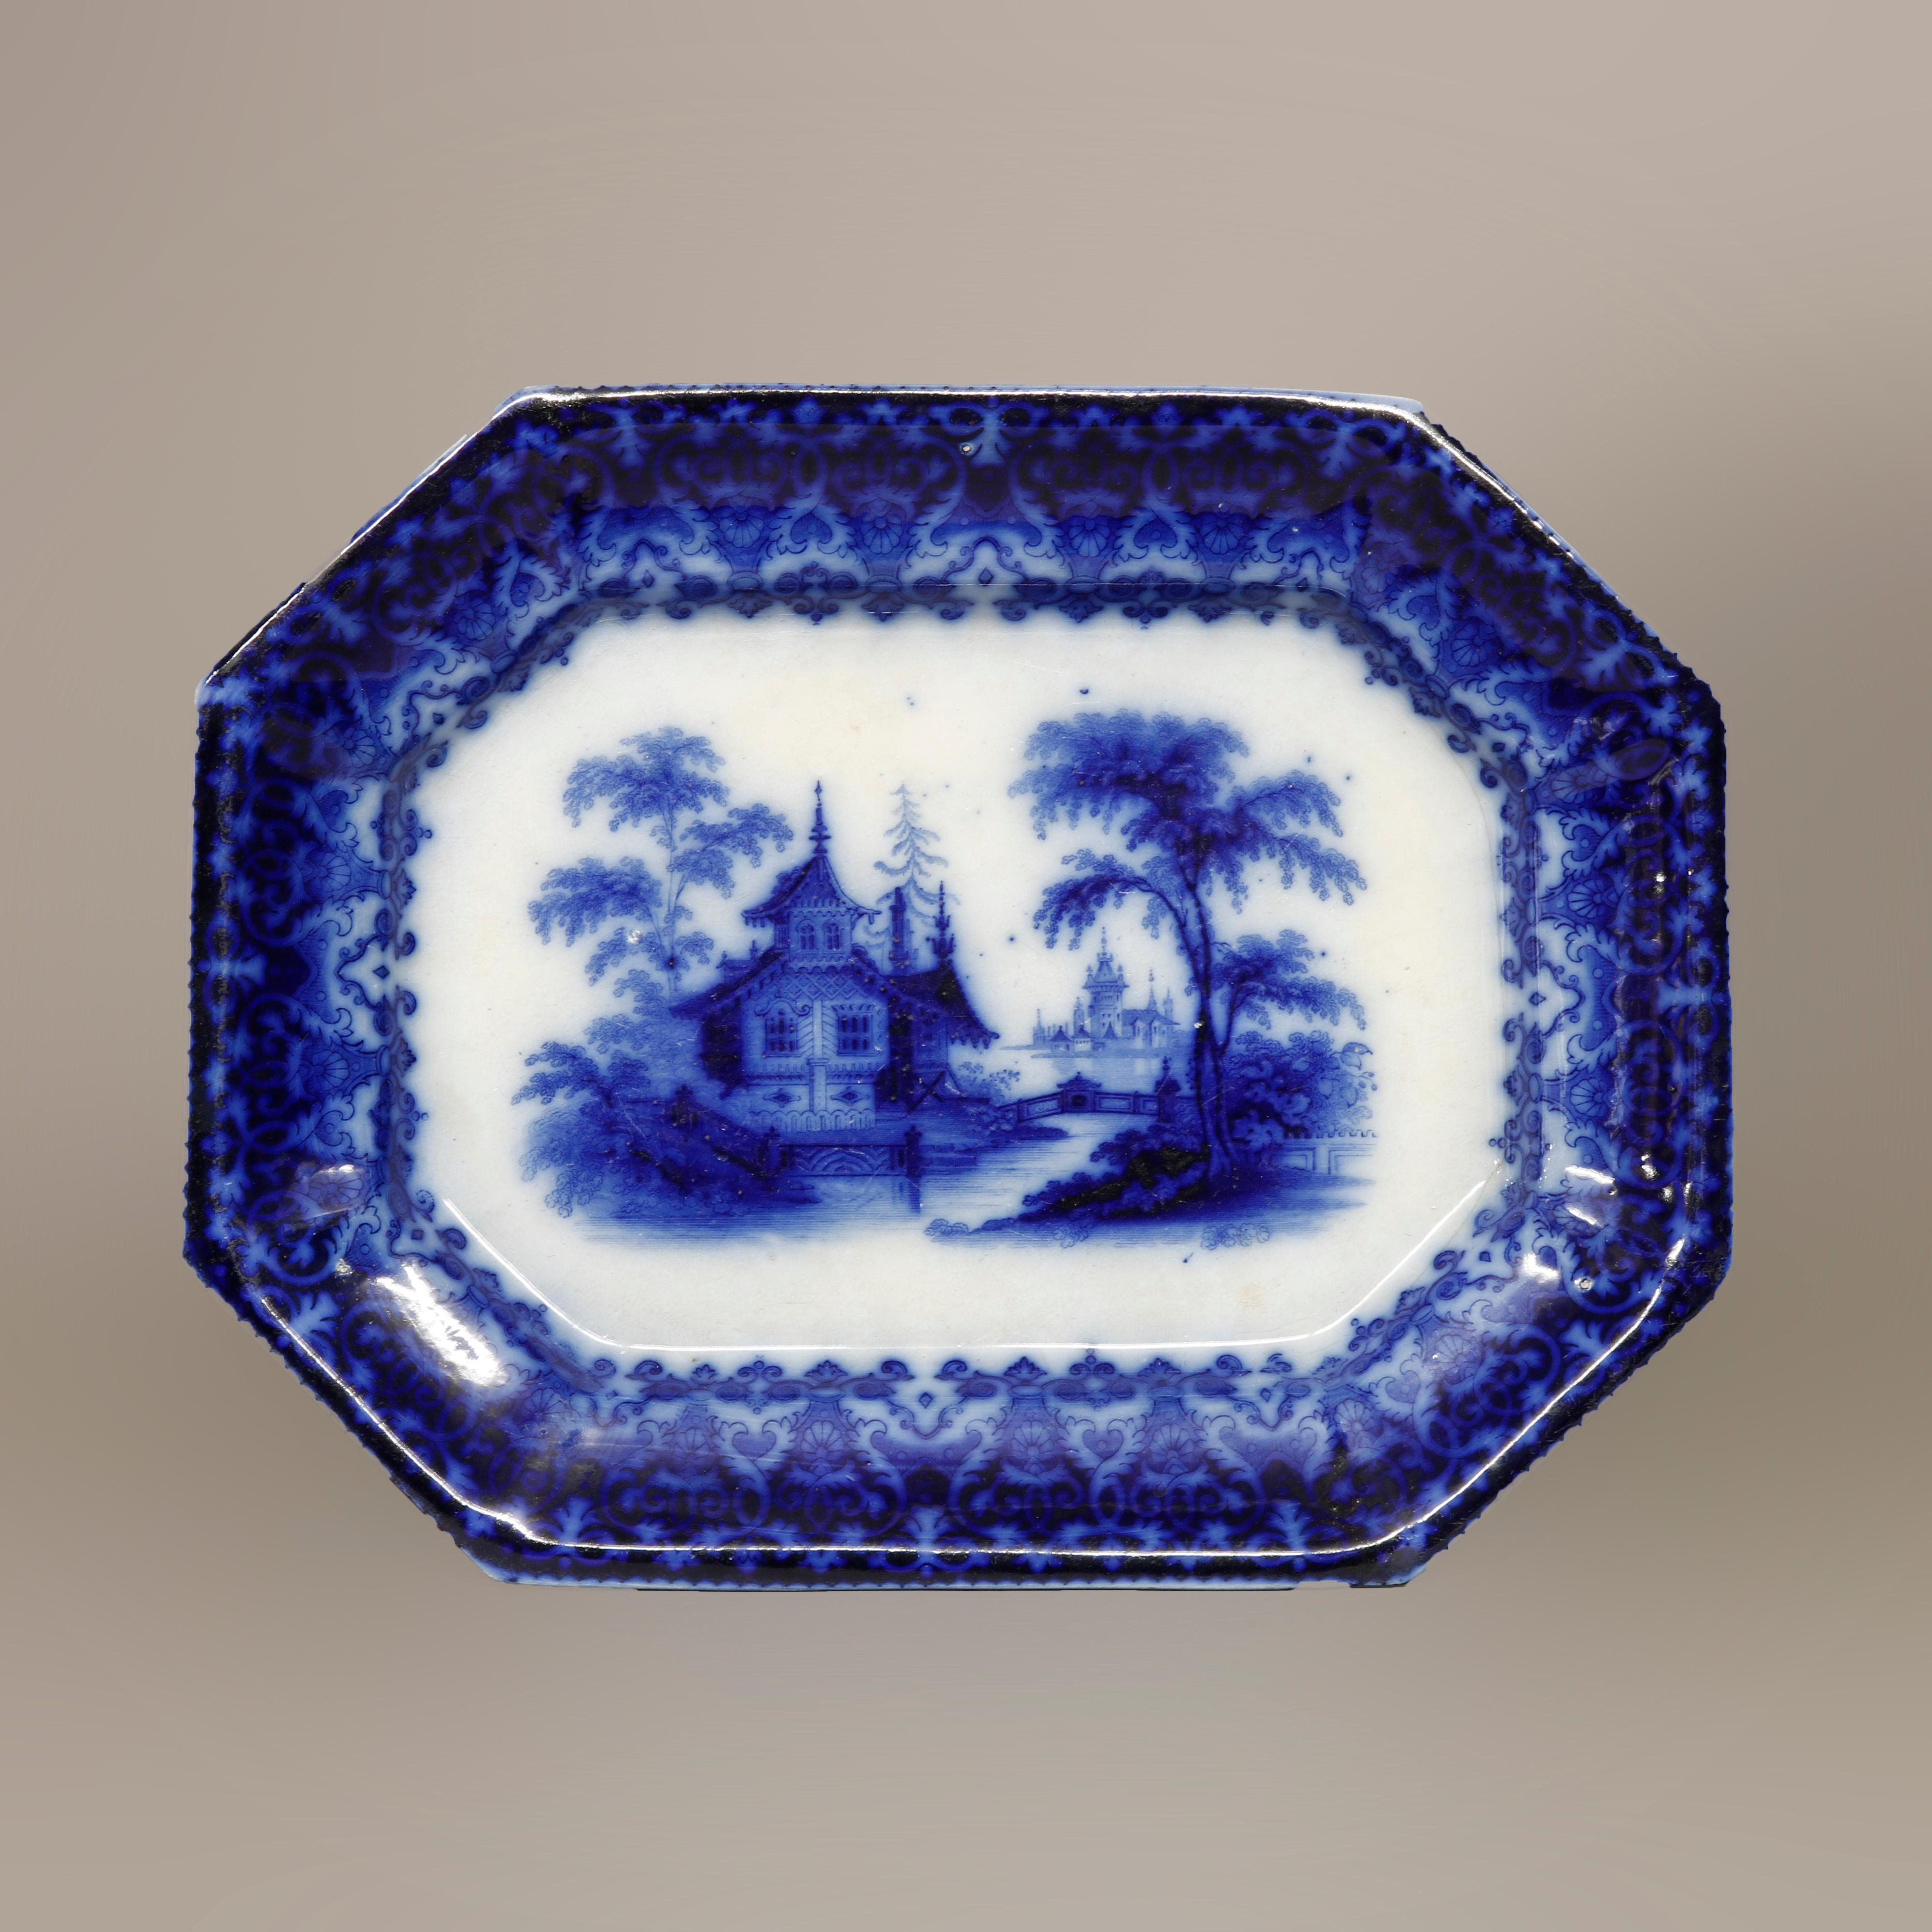 An antique platter by TJ&J Mayer offers porcelain construction with flow blue Chinoiserie decoration including well with landscape scene having structure and Persian pattern on rim, maker mark en verso as photographed, reminiscent of English